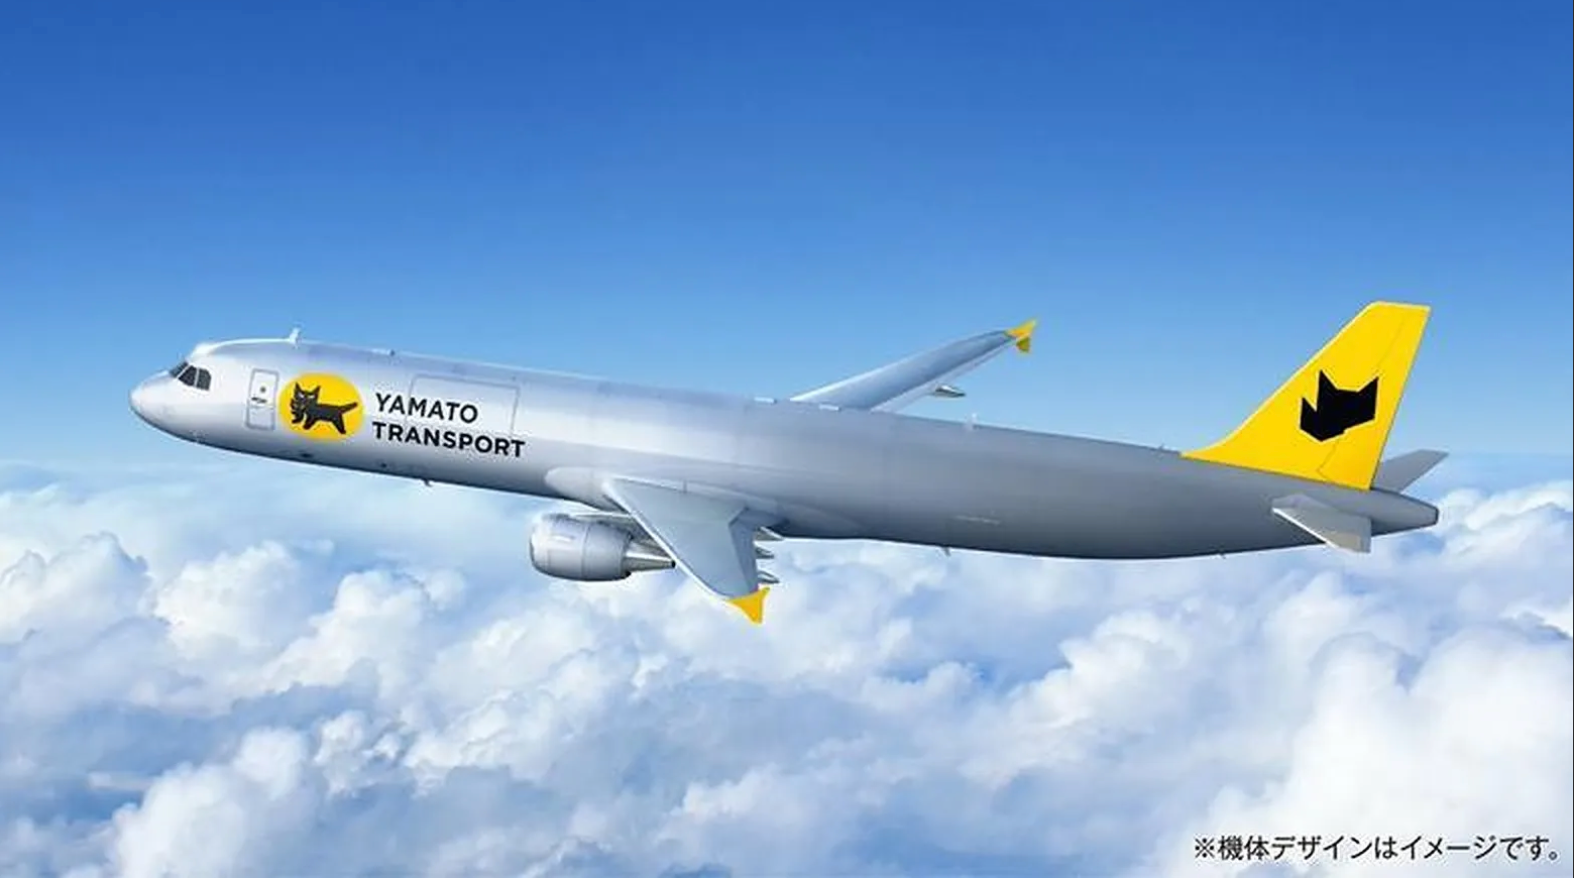 Conceptual drawing of completed coloring of Yamato Transport A321 